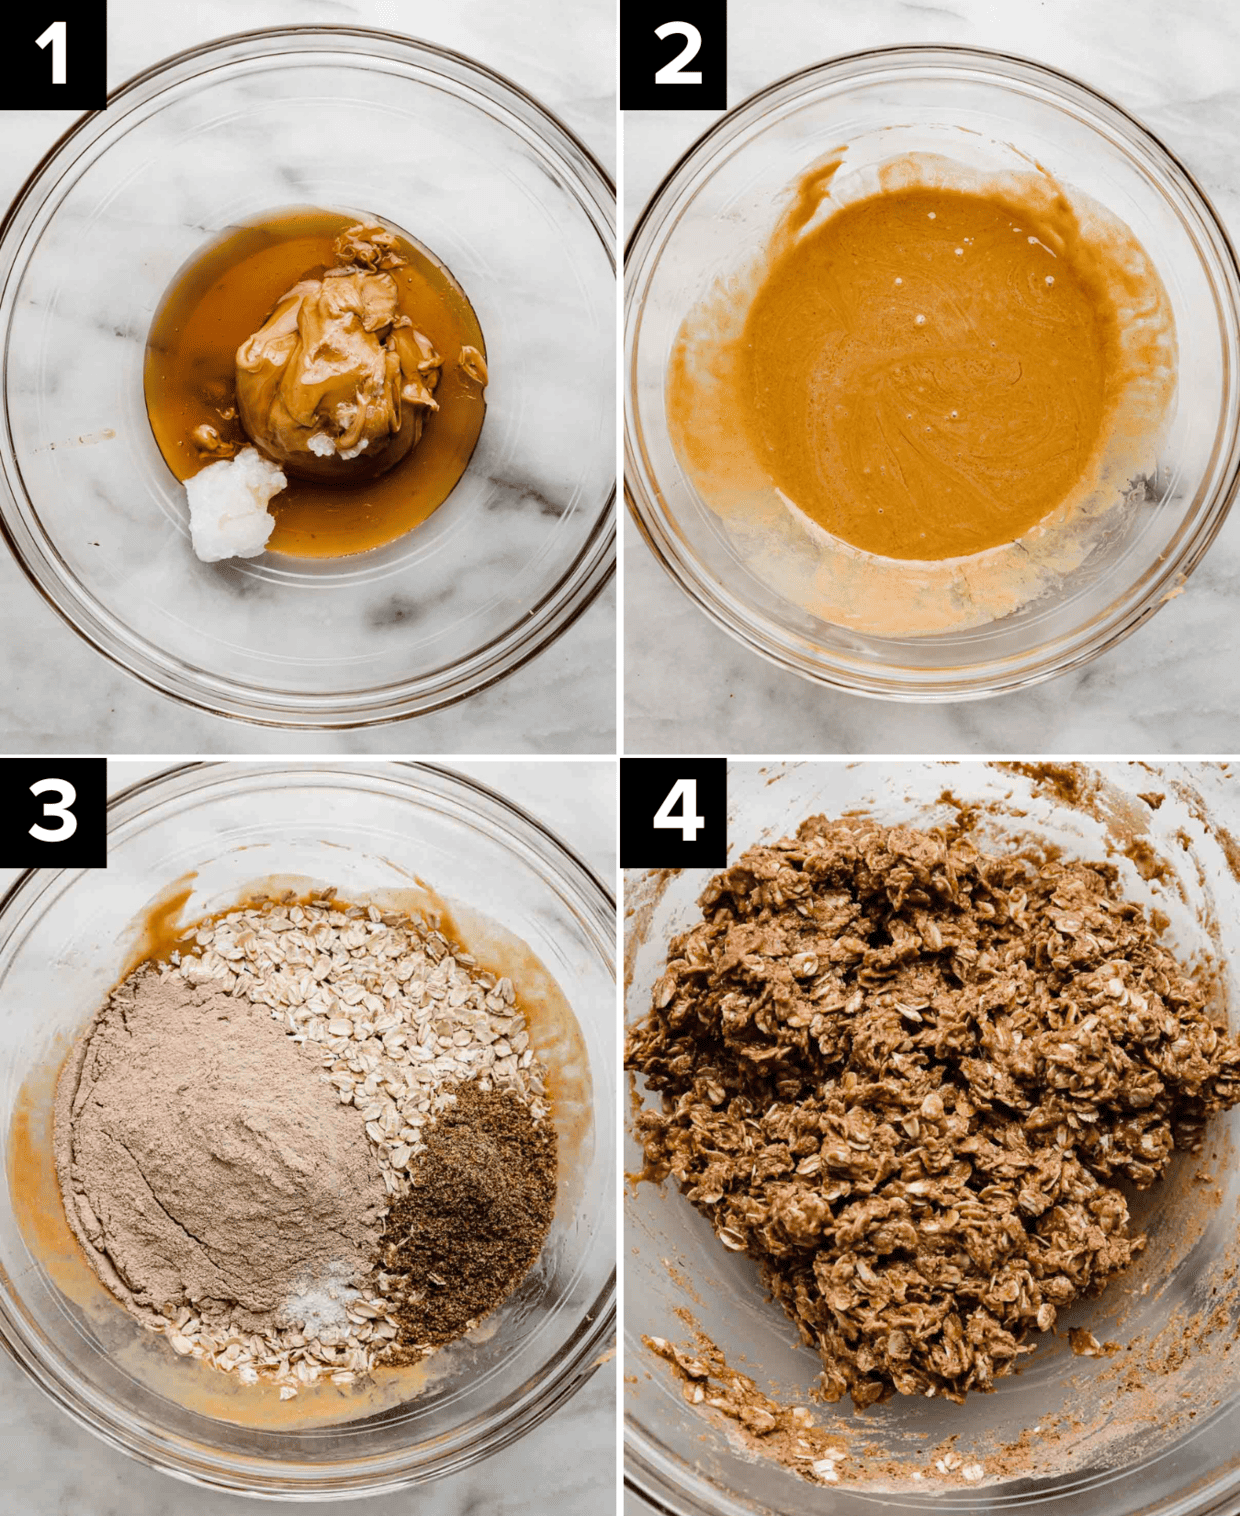 Four images showing how to make Chocolate Peanut Butter Protein Bars, top left is peanut butter, honey and coconut oil in a glass bowl, top right is melted peanut butter in a glass bowl on a white background, bottom left image is oats, chocolate protein powder, flaxseed in a glass bowl, bottom right photo is Chocolate Peanut Butter Protein bar mixture in a glass bowl.